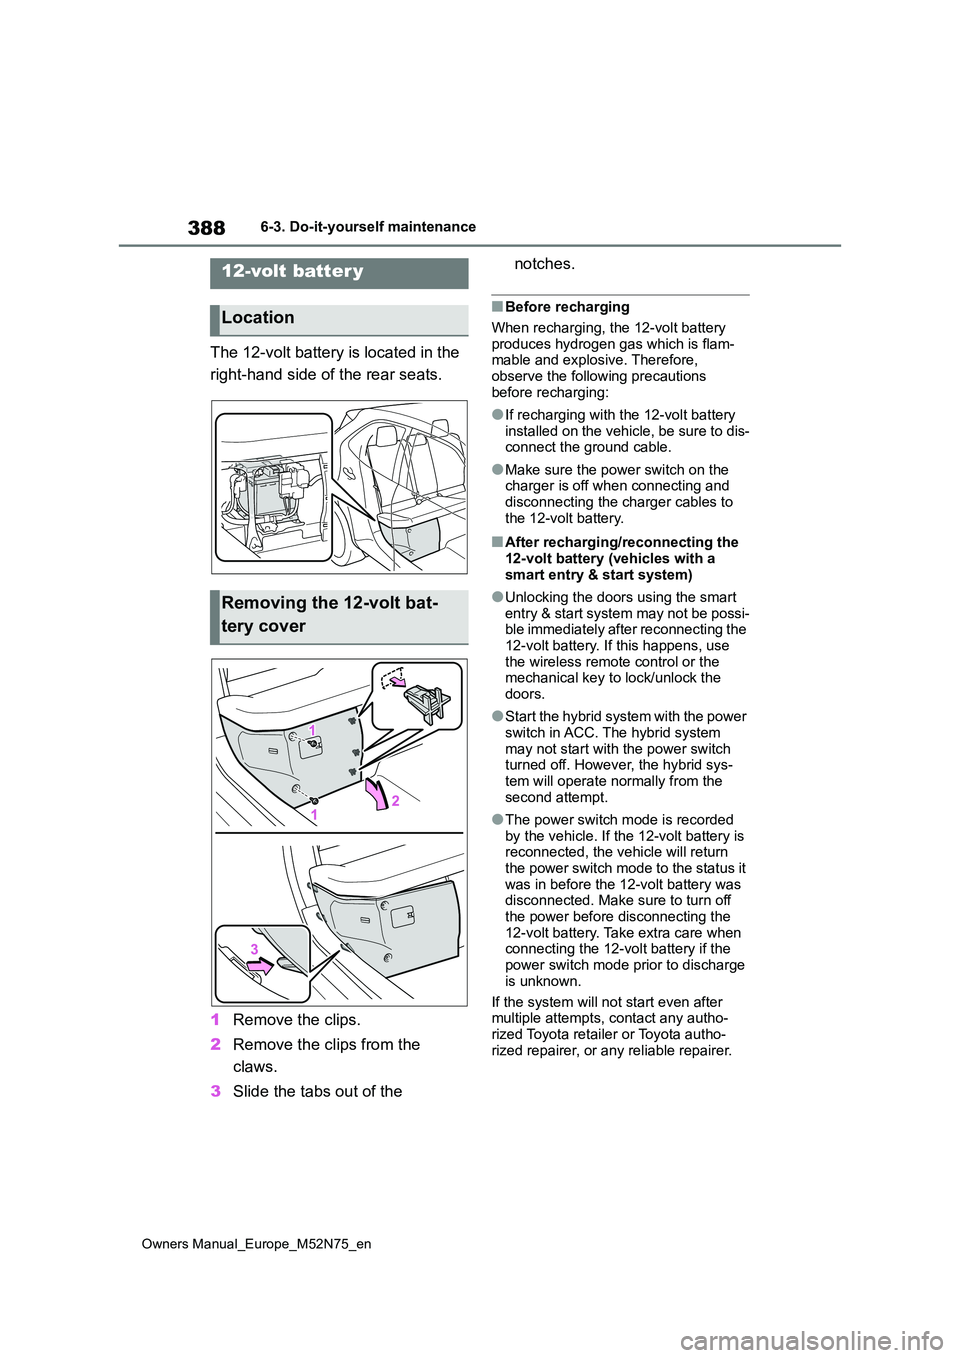 TOYOTA YARIS CROSS 2023  Owners Manual 388
Owners Manual_Europe_M52N75_en
6-3. Do-it-yourself maintenance
The 12-volt battery is located in the  
right-hand side of the rear seats. 
1 Remove the clips. 
2 Remove the clips from the  
claws.